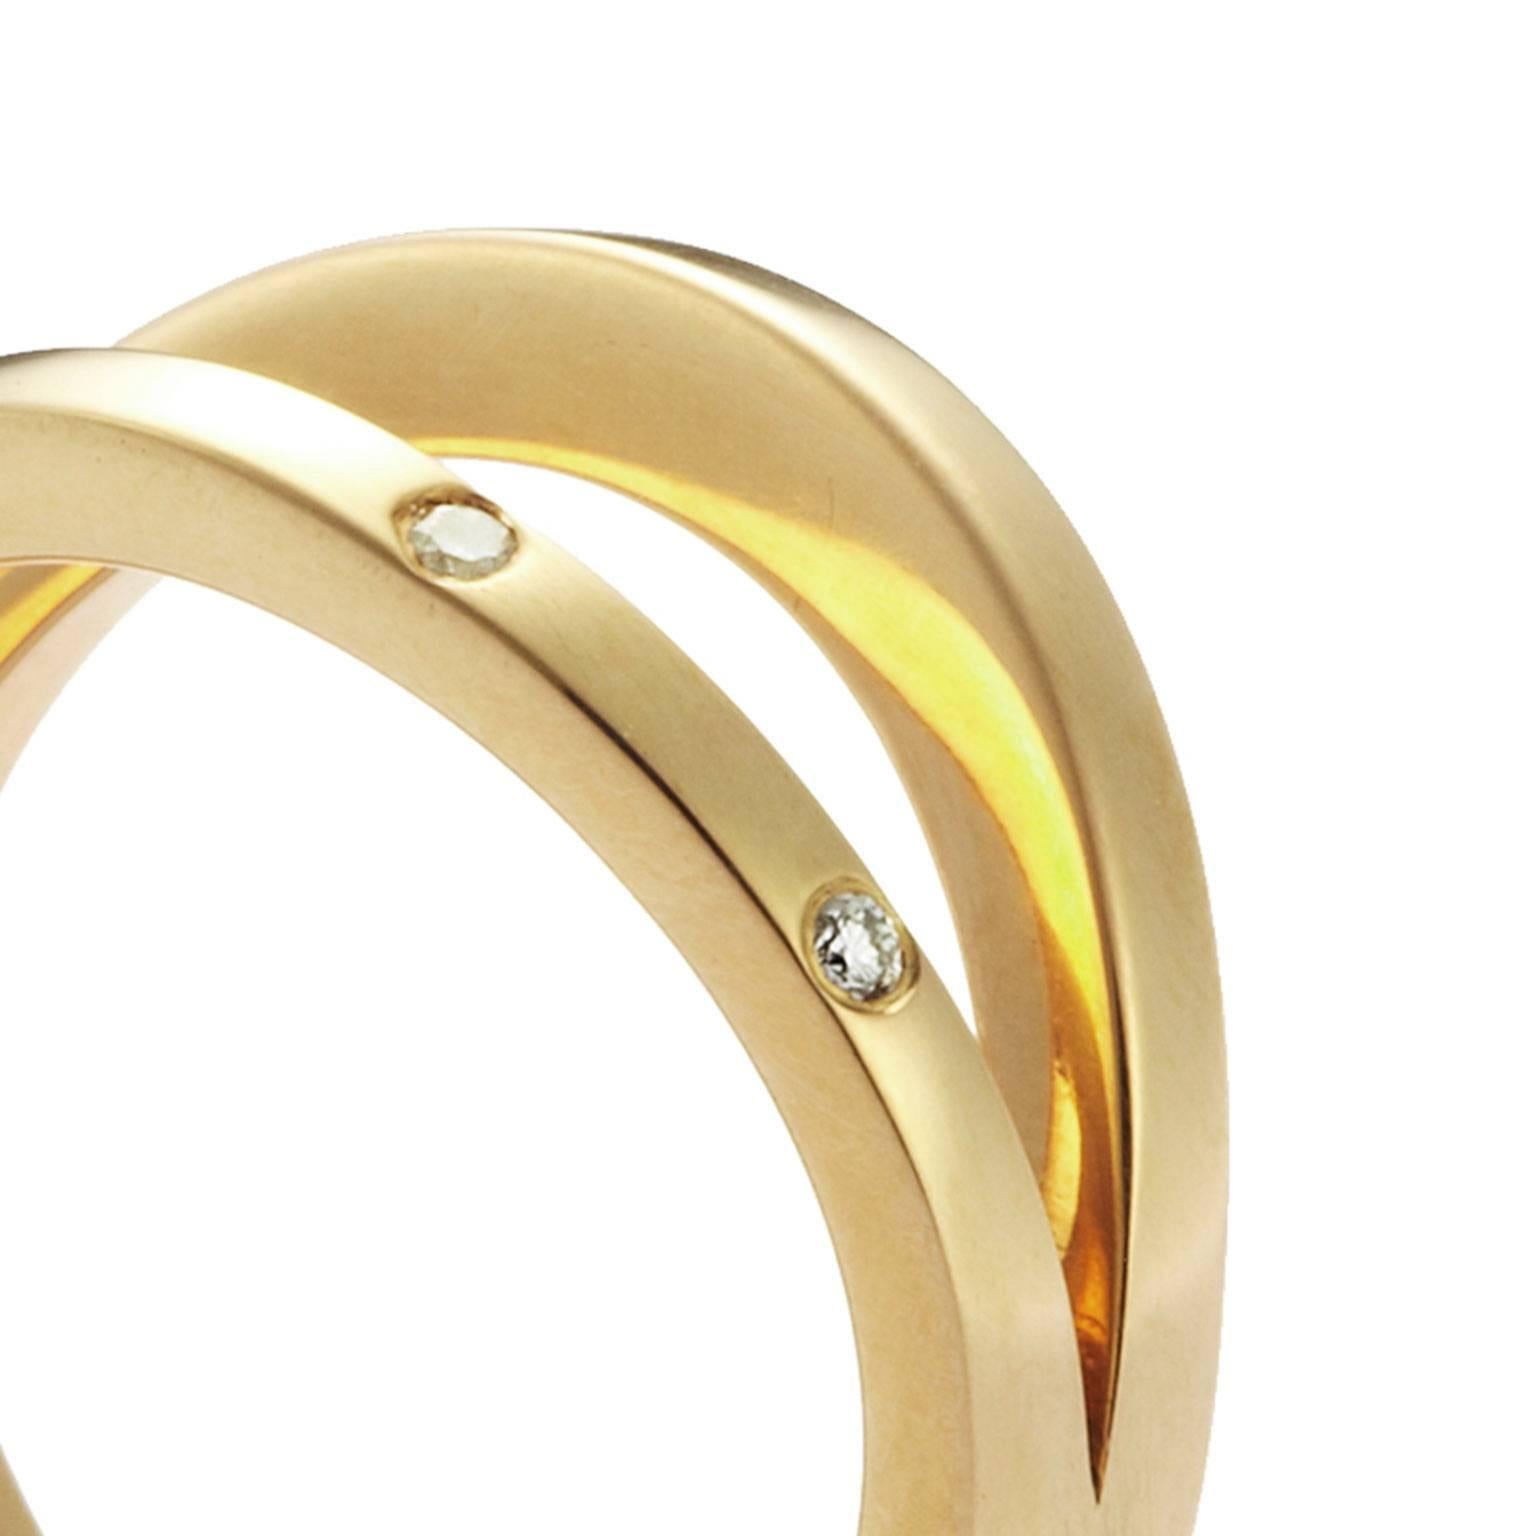 This simple and elegant ring symbolises the unity of two people in a relationship. This ring can be used as a commitment, alternative engagement or wedding ring. Handcrafted in our Sydney studios in 18 karat yellow gold, it is set with 2 brilliant